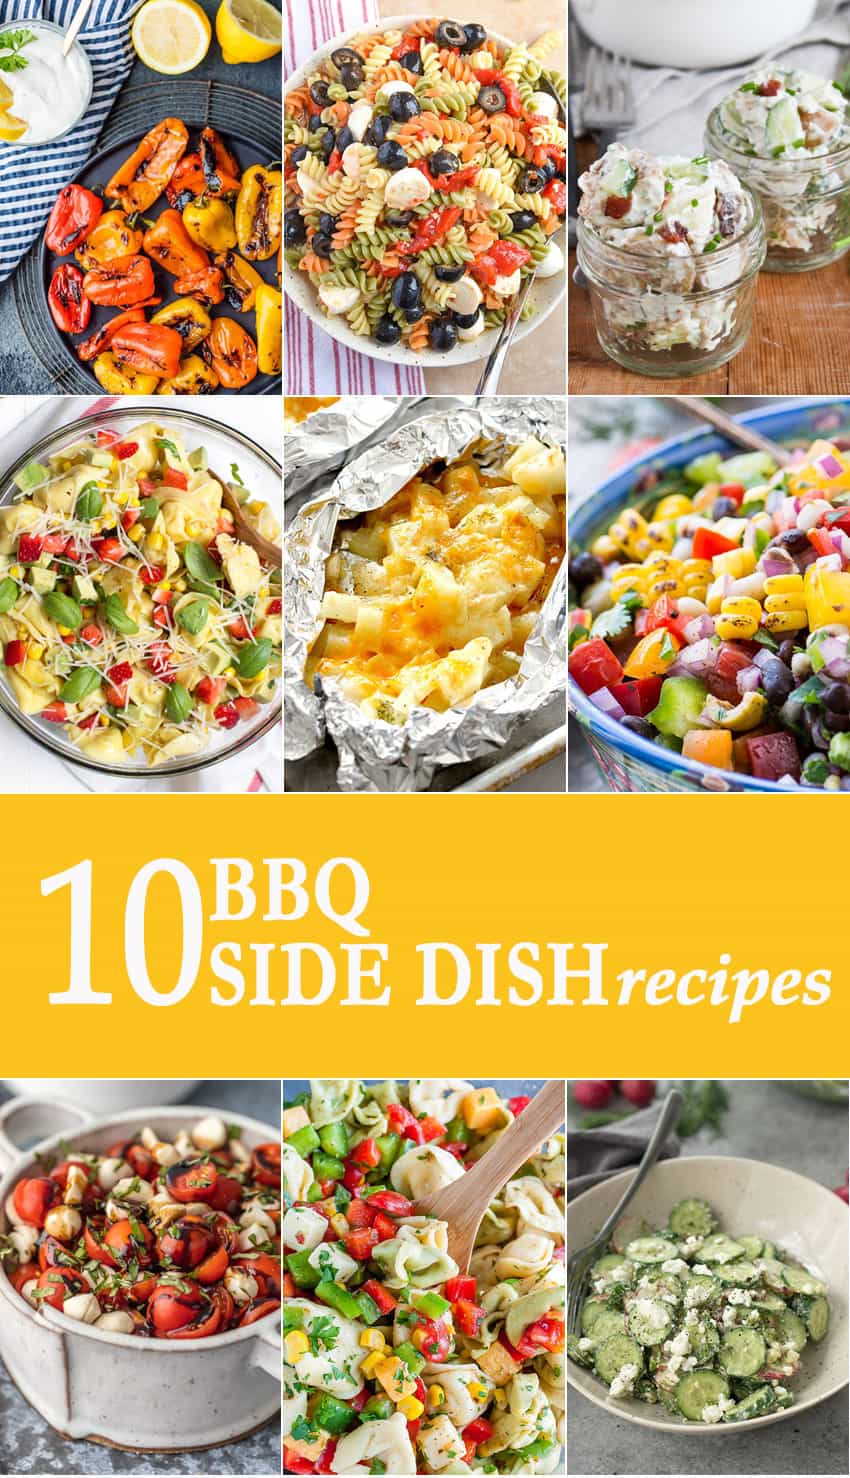 10 BBQ Side Dishes - The Cookie Rookie